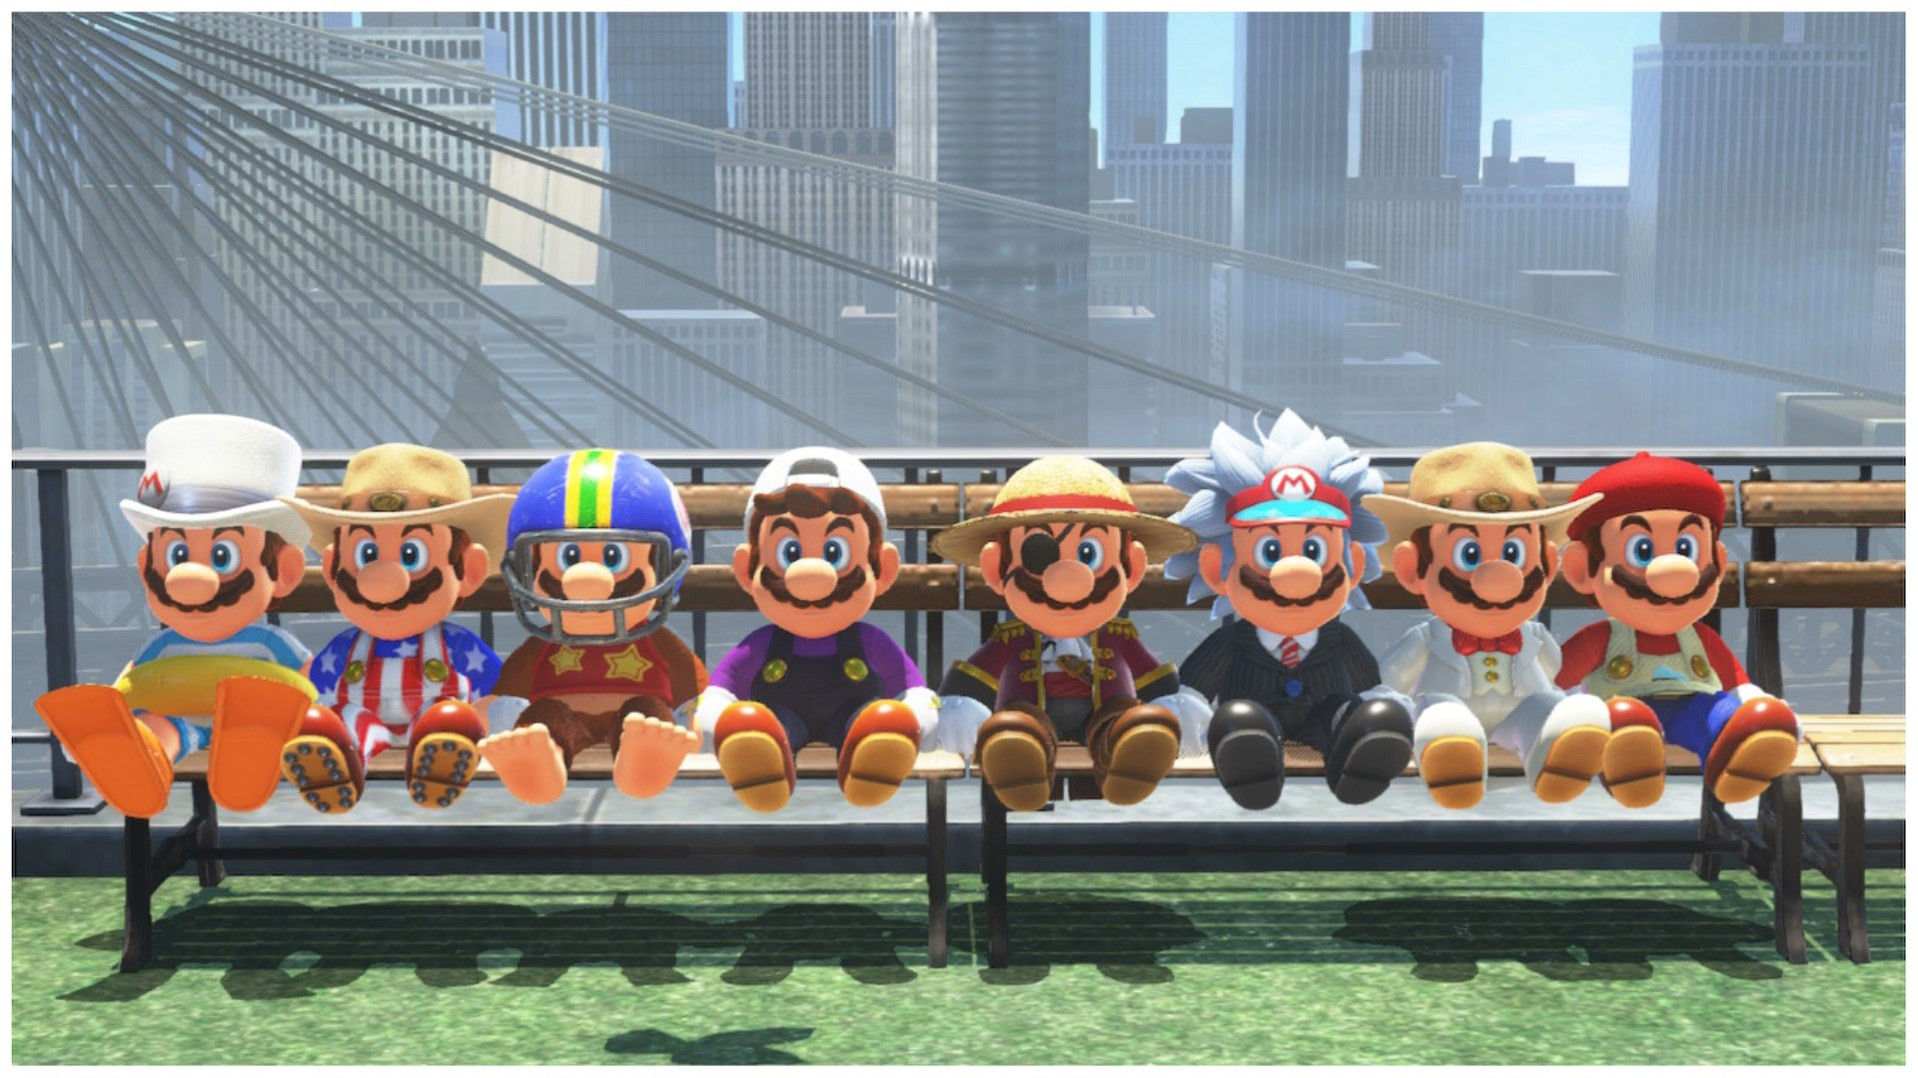 Mario Odyssey playable with 10 players in new multiplayer mod